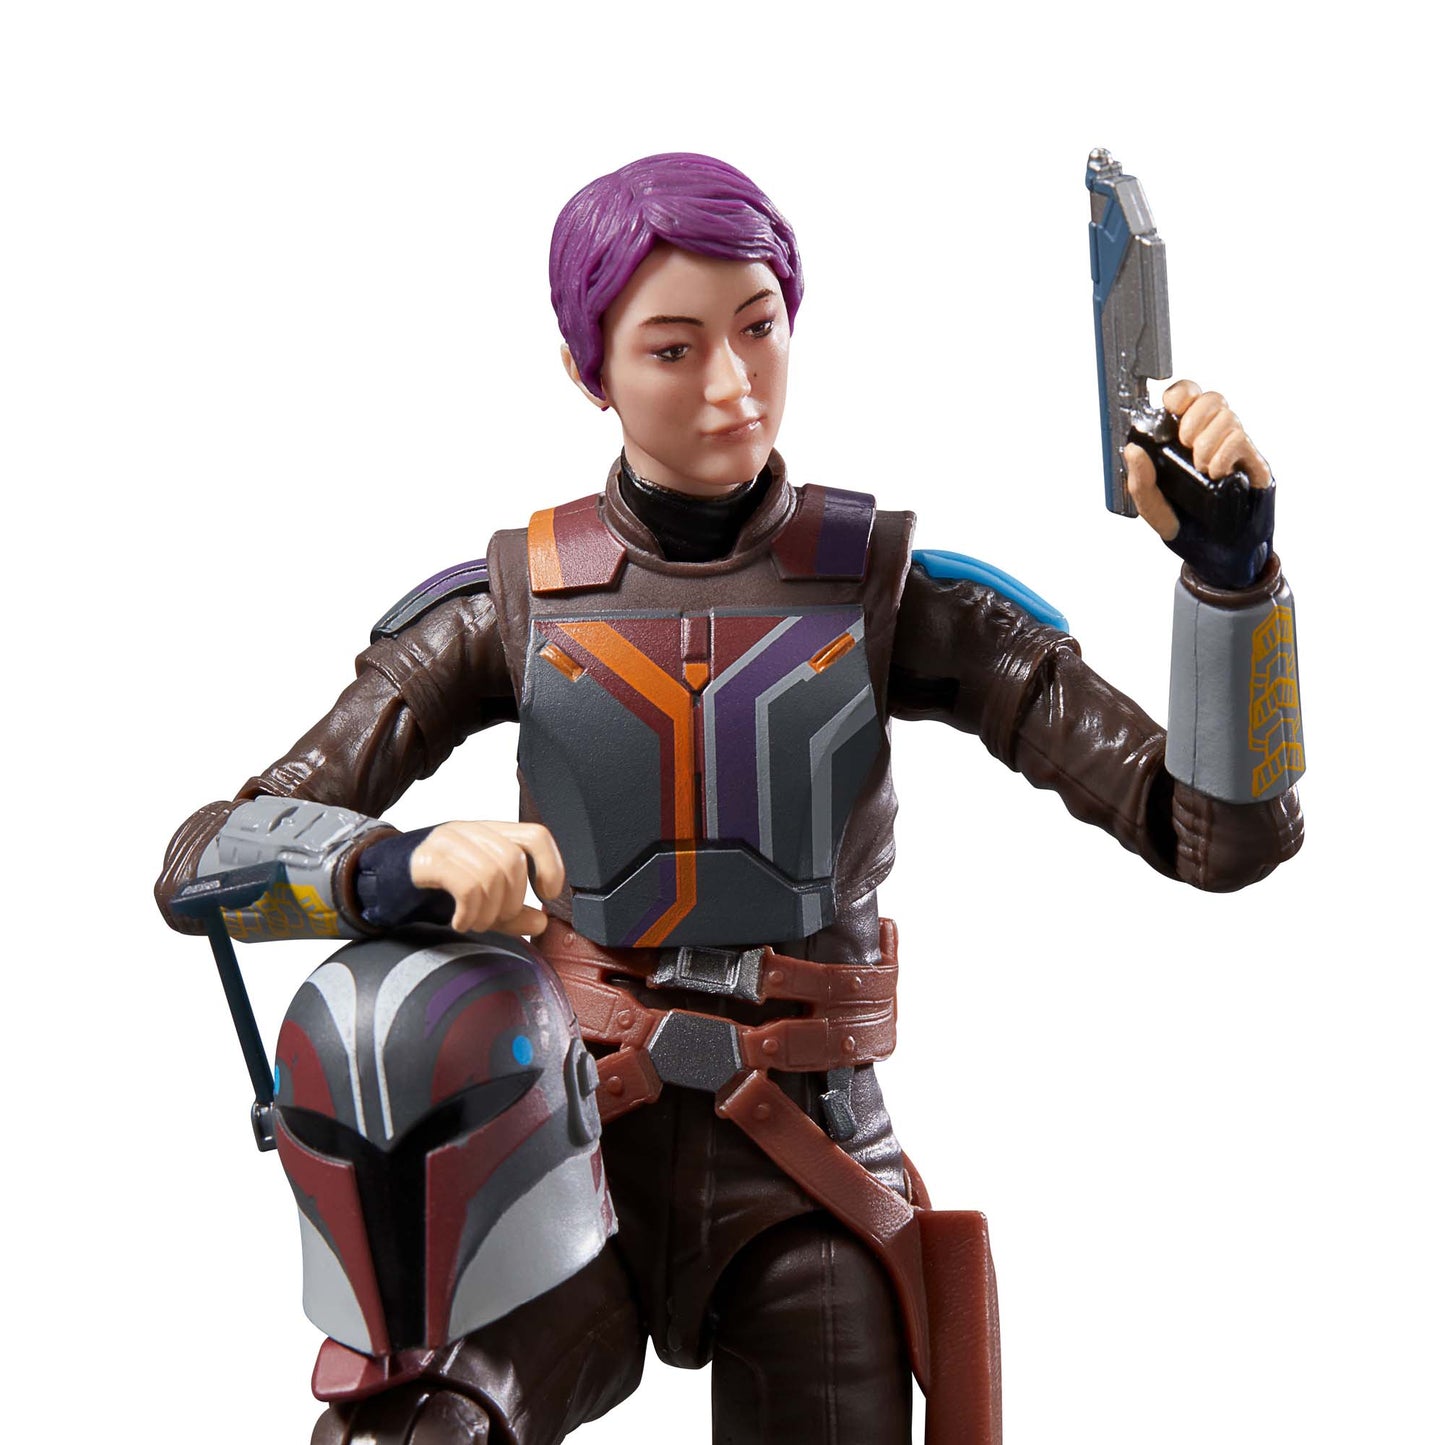 Star Wars The Black Series Sabine Wren 6-Inch Action Figure Toy close up look - Heretoserveyou